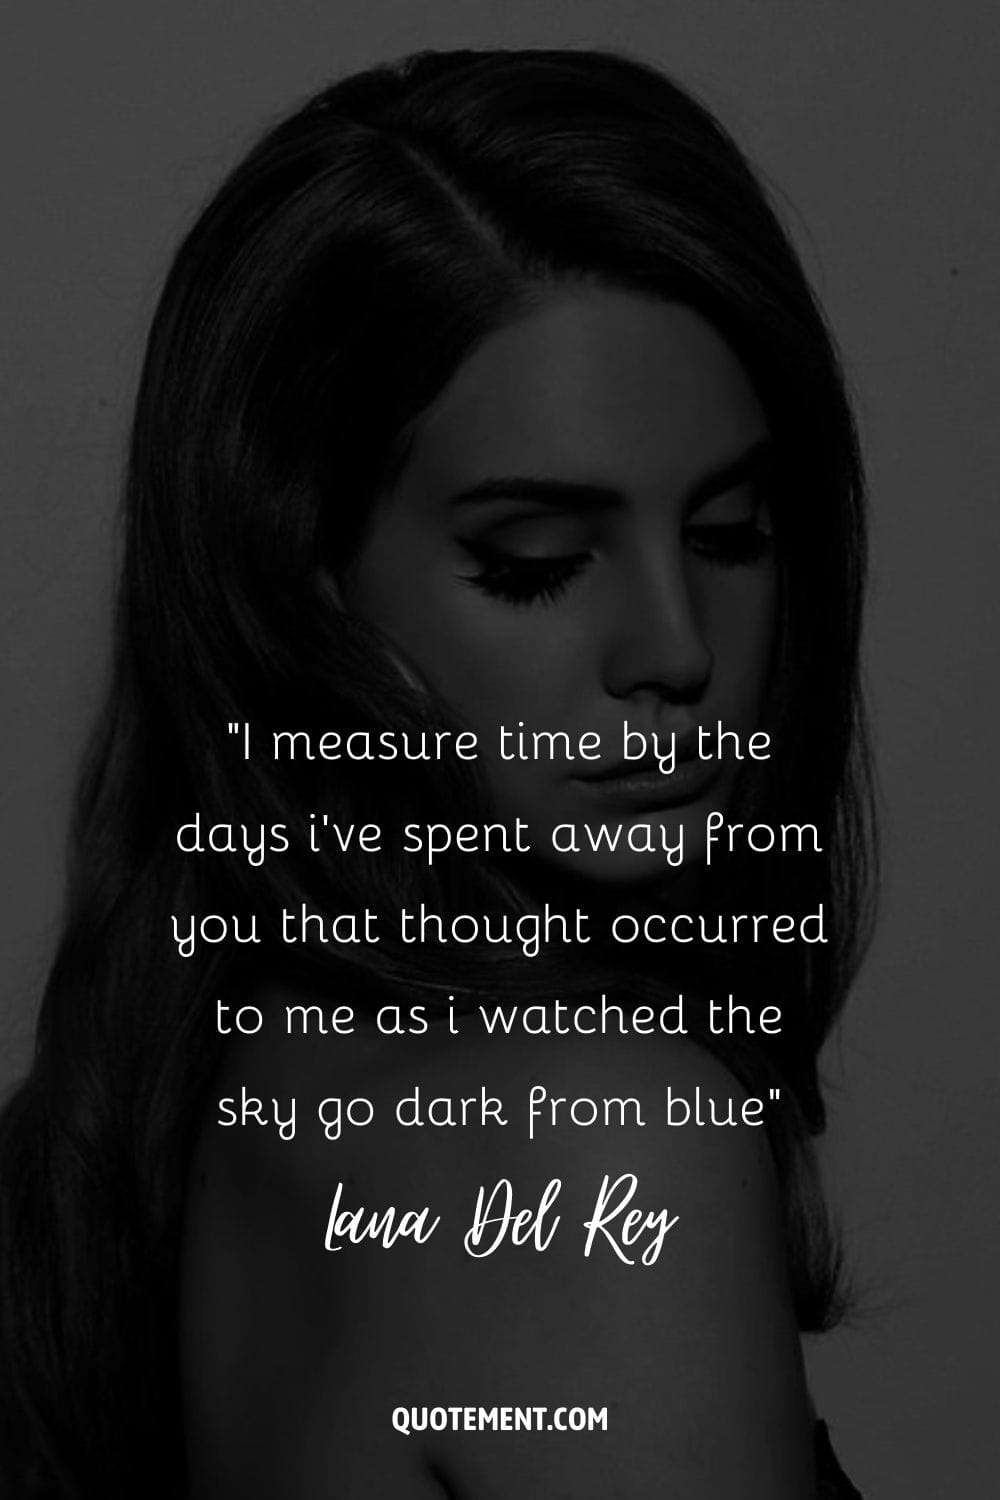 I measure time by the days i’ve spent away from you that thought occurred to me as i watched the sky go dark from blue